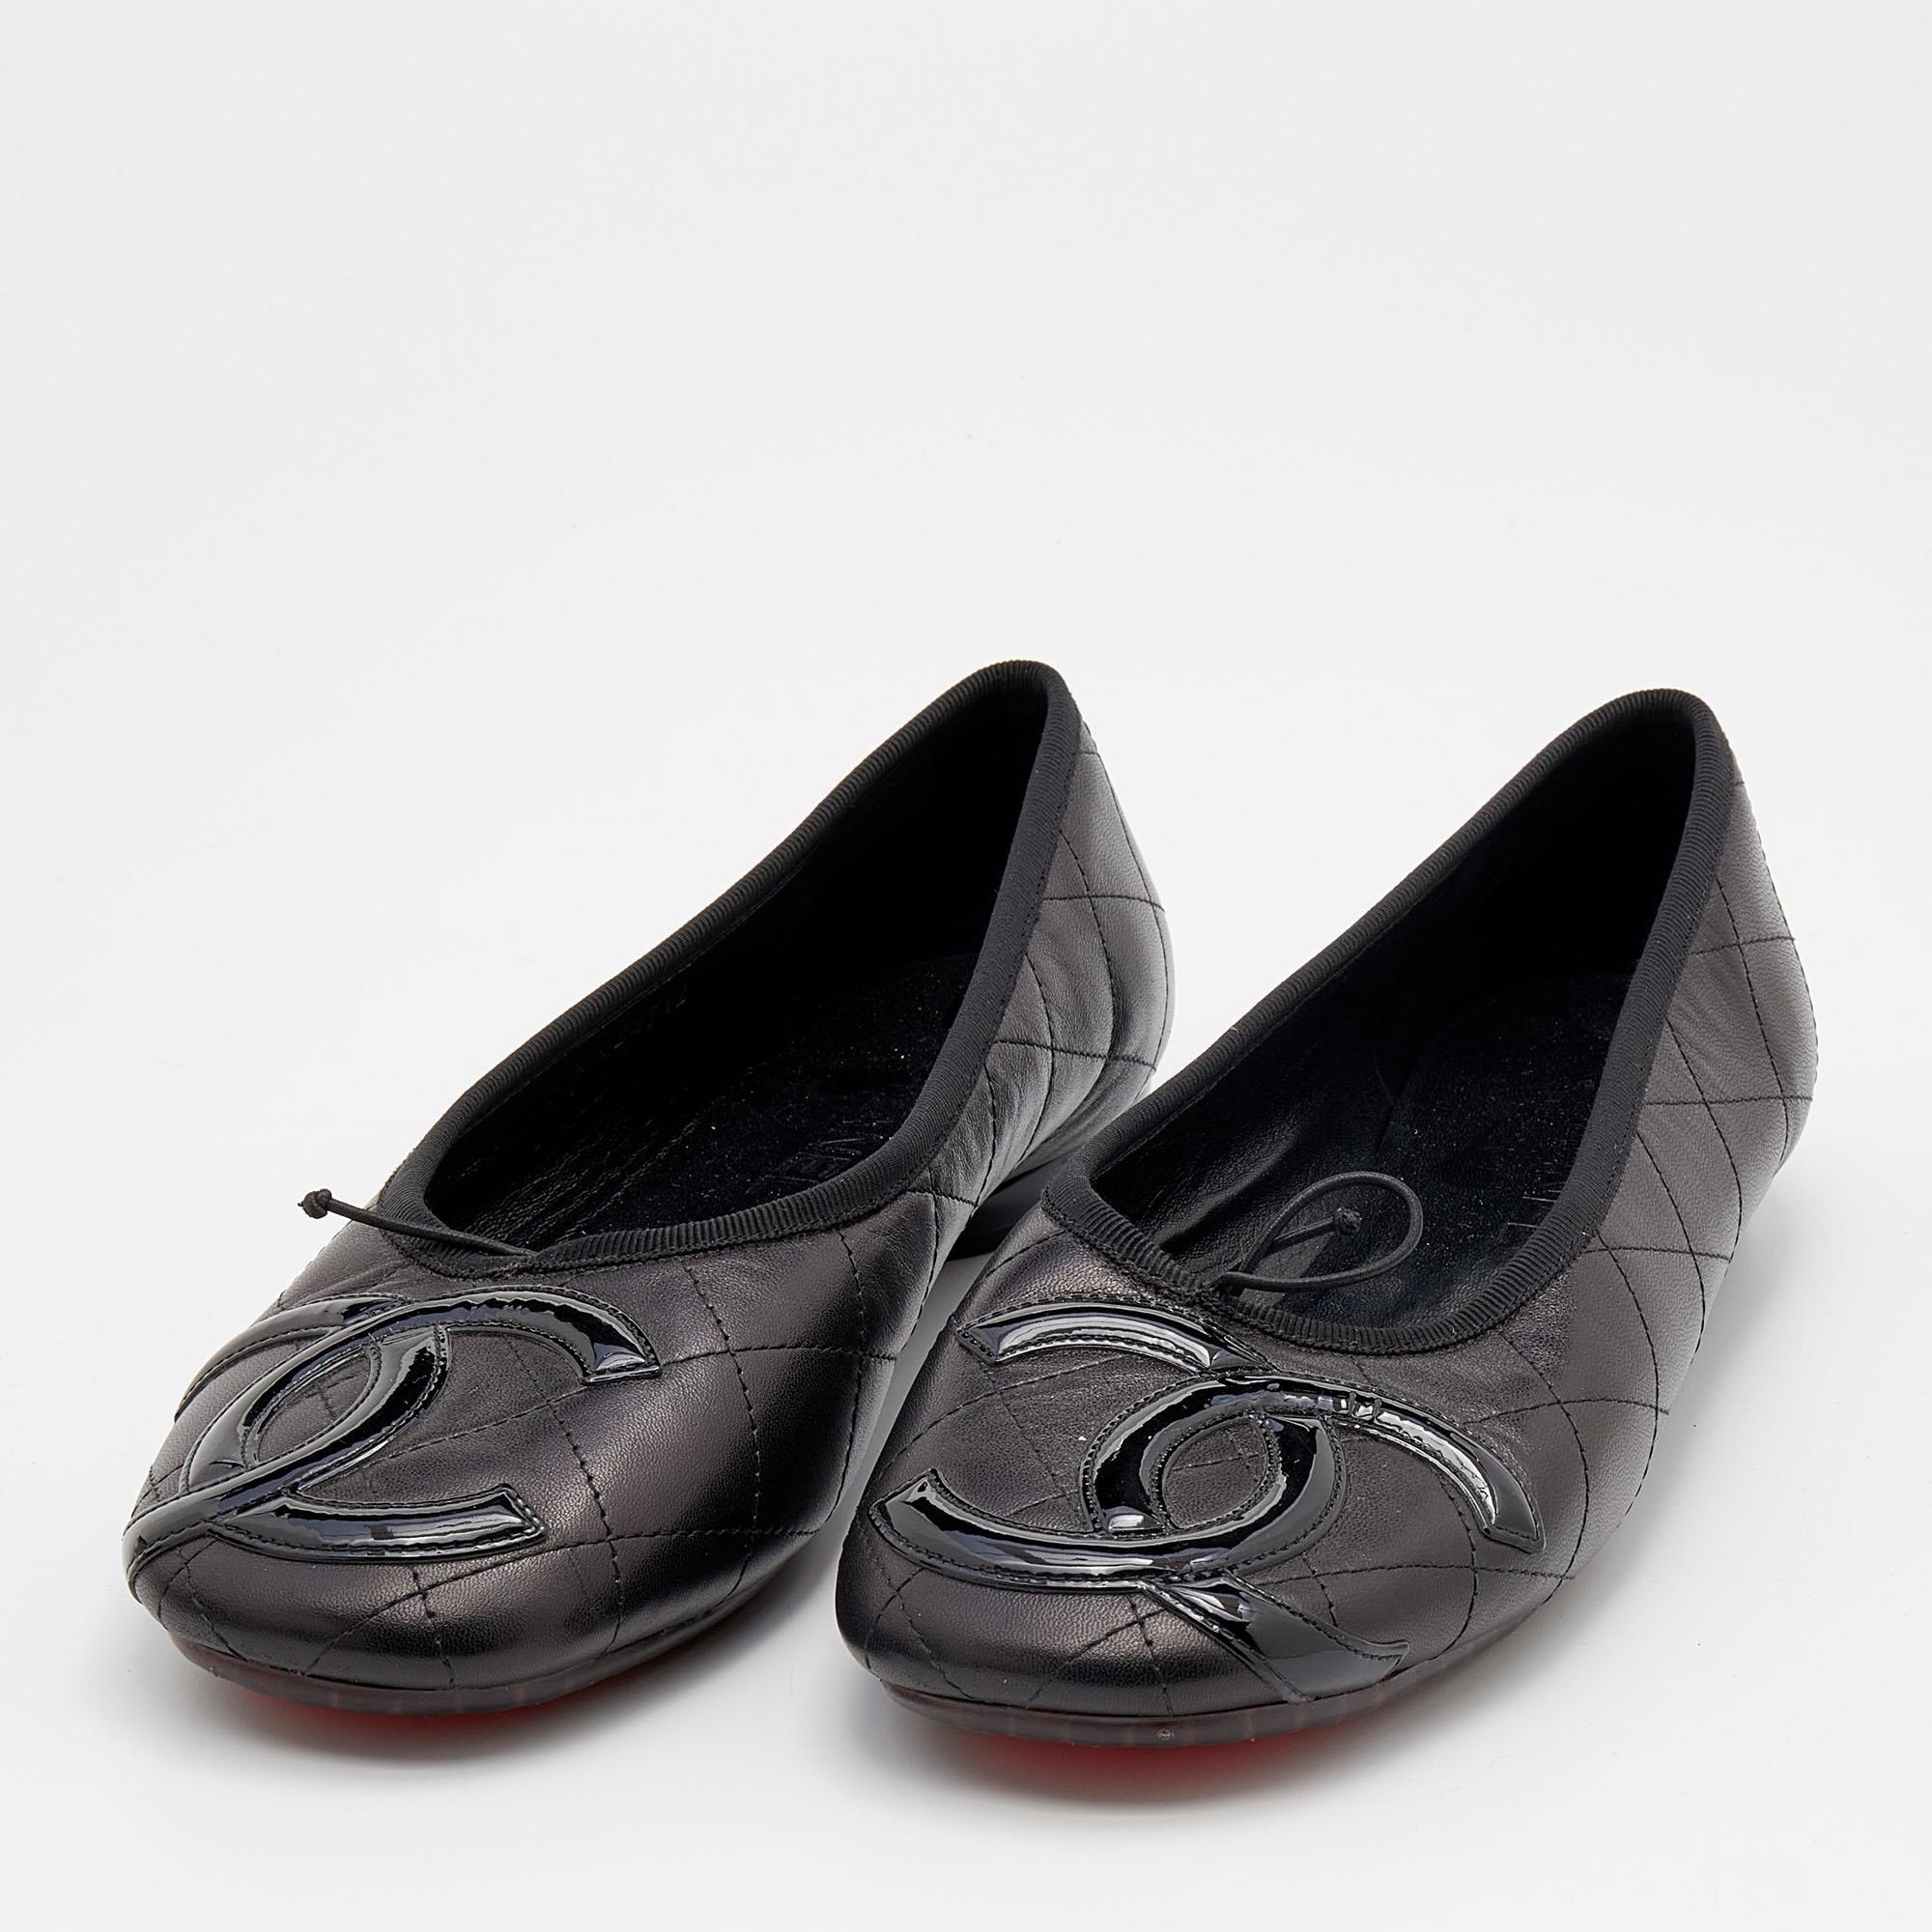 Blending comfort and luxury perfectly, these ballet flats from Chanel will surely become your favorite! The black flats are crafted from leather with patent leather trims and feature rounded toes. They showcase the signature quilted pattern on the